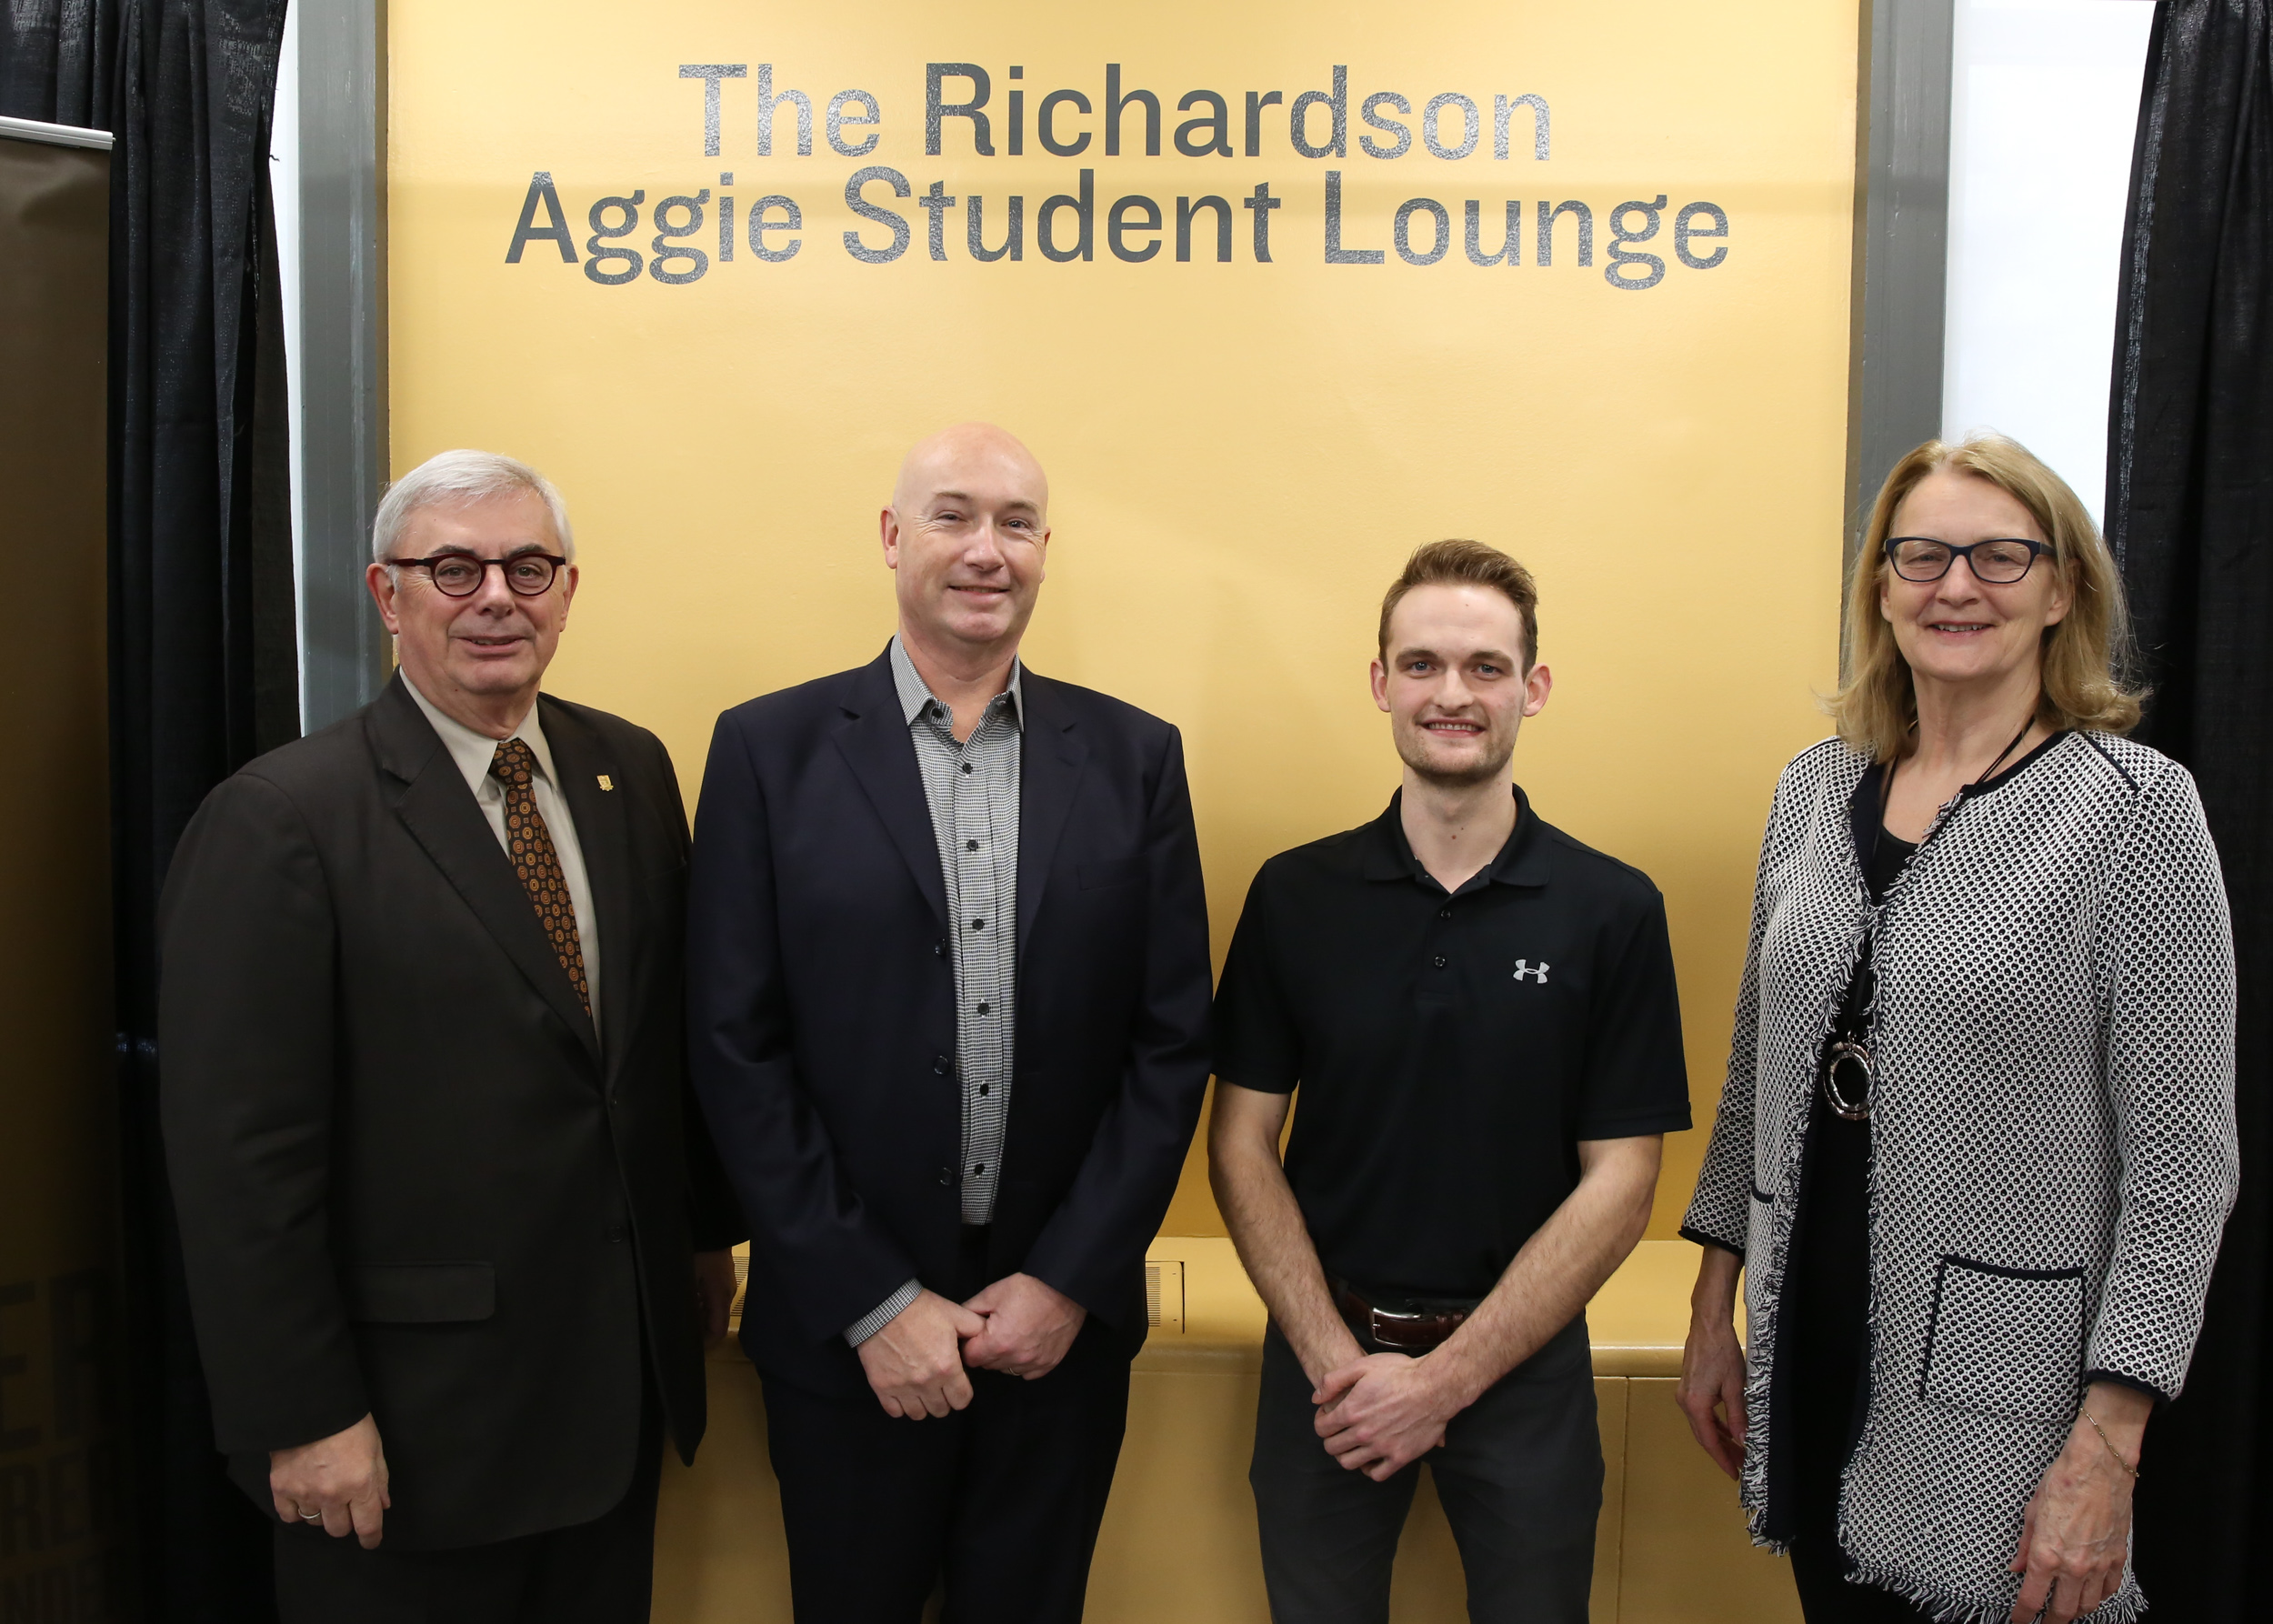 University of Manitoba President David Barnard, Jean-Marc Ruest, Brian Archibald and Karin Wittenberg officially open the new student space.